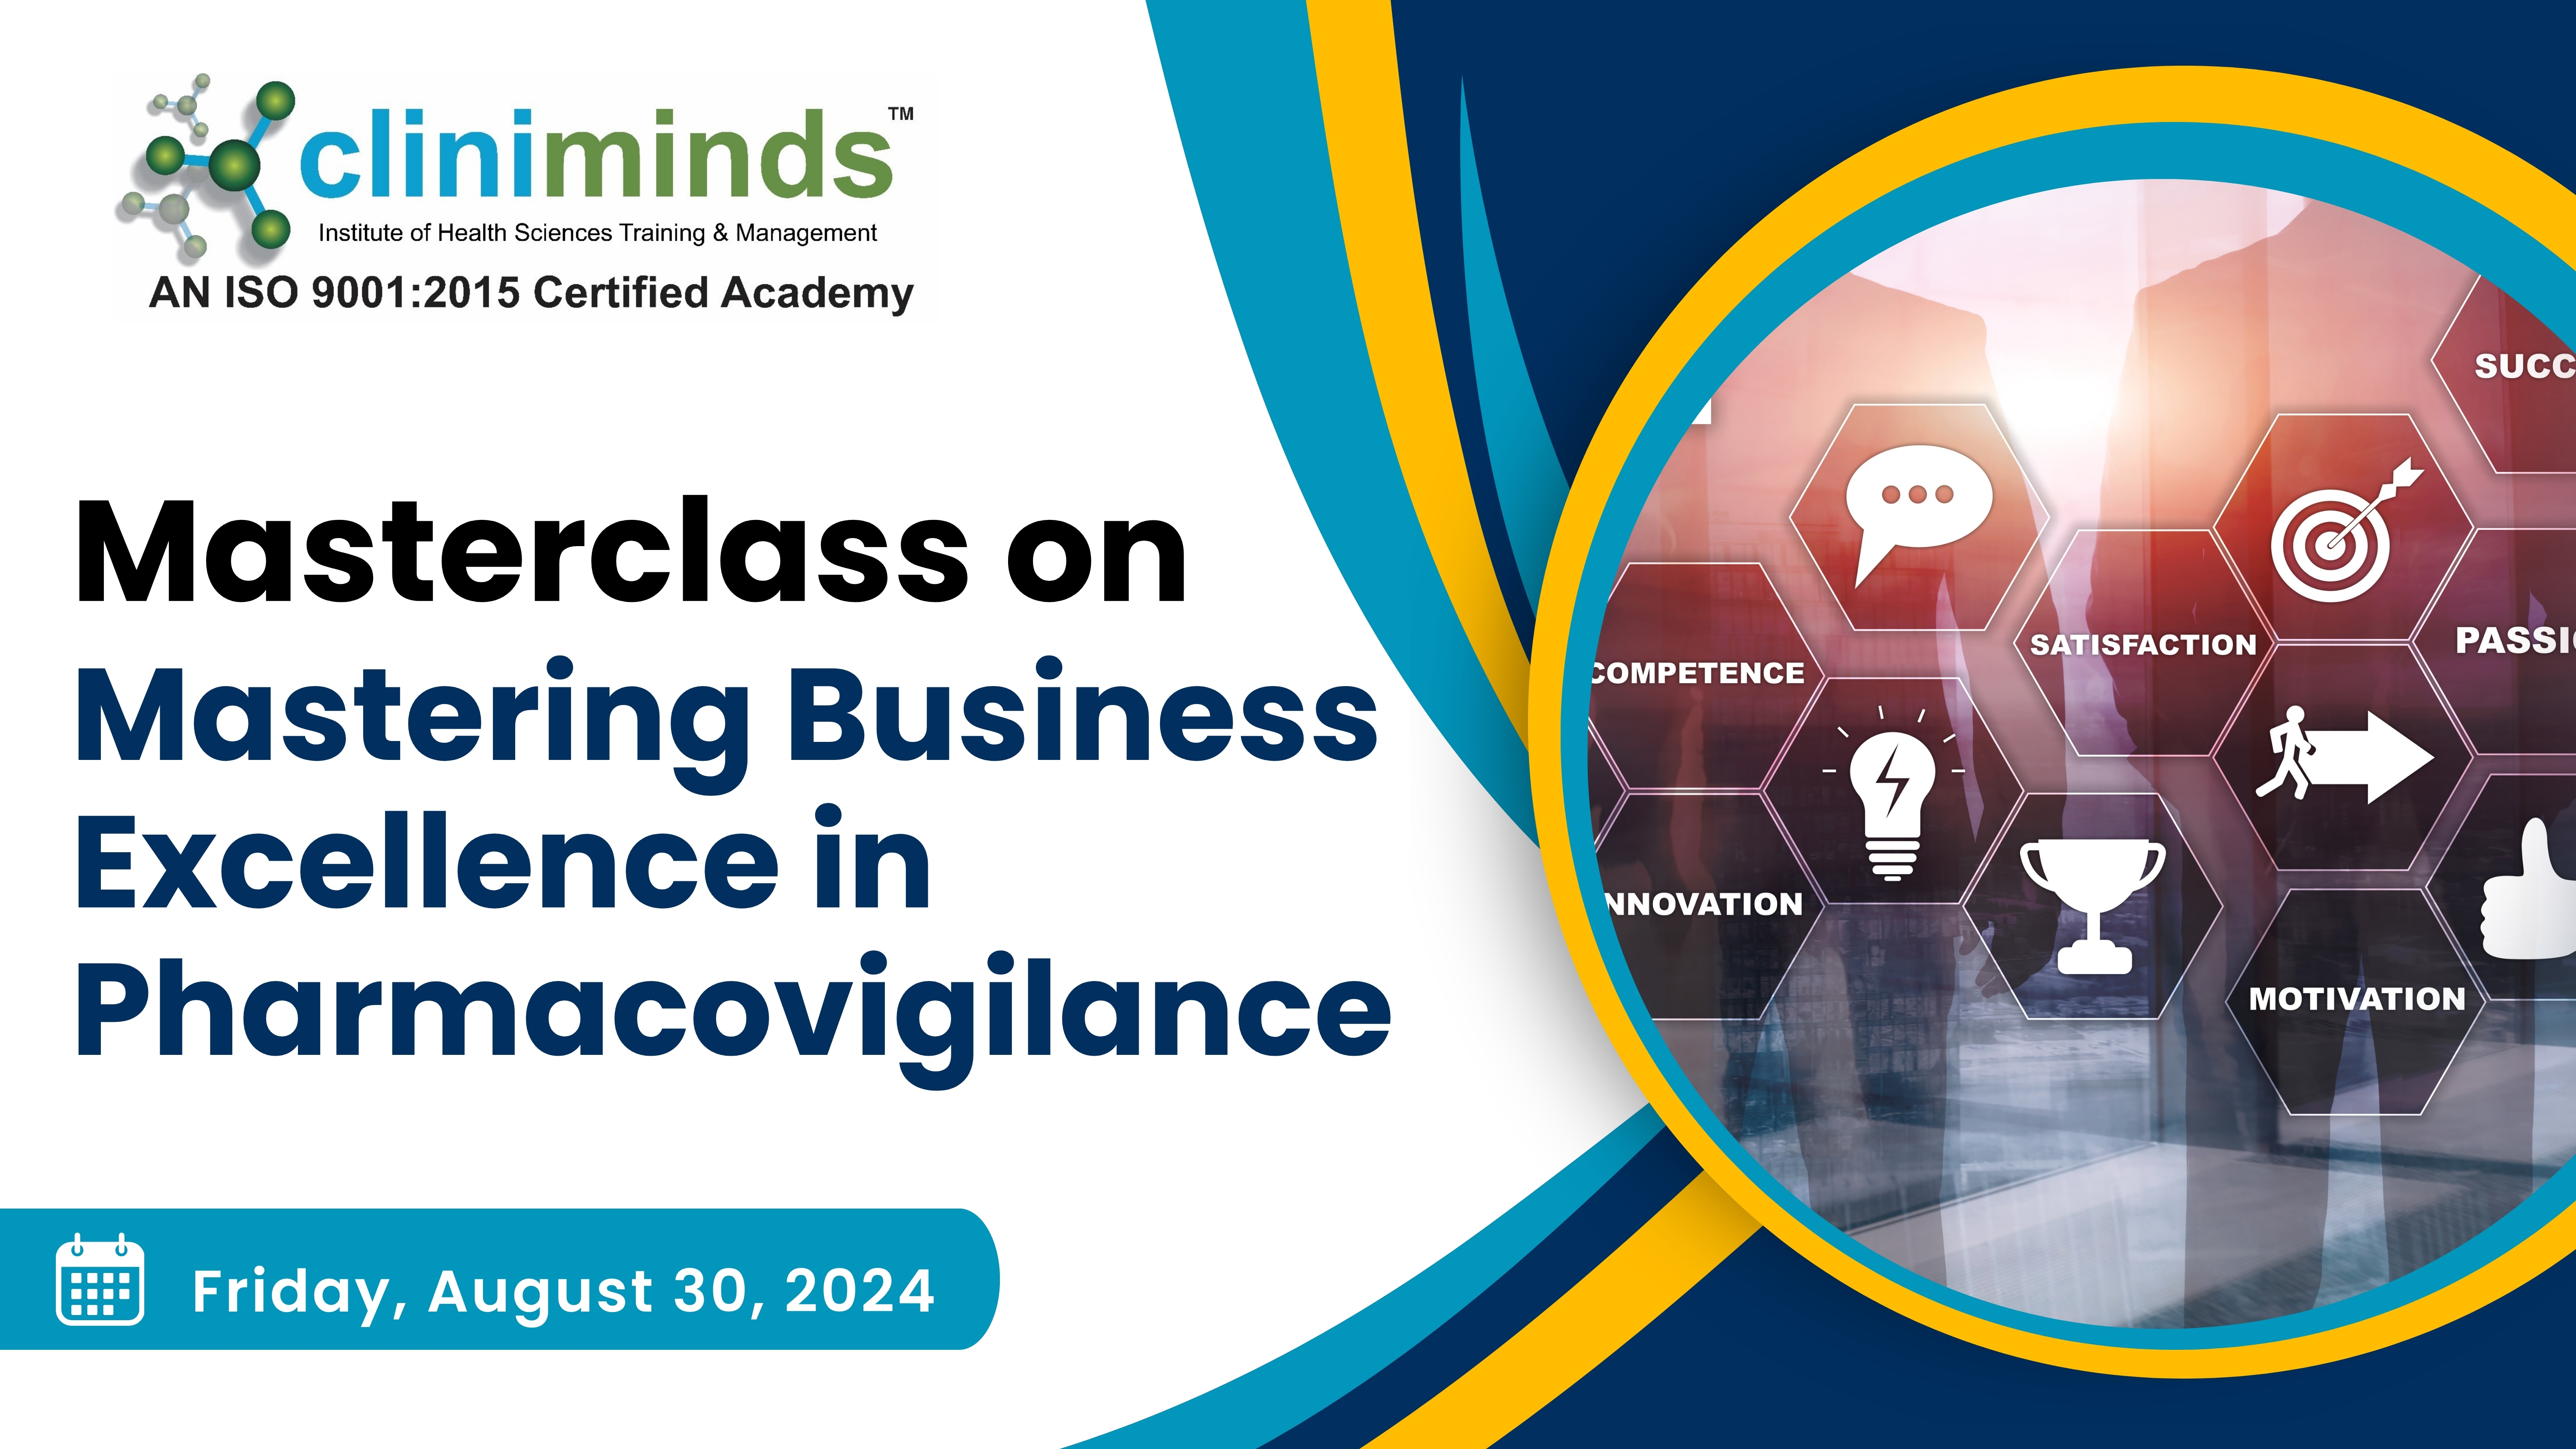 Masterclass On Mastering Business Excellence In Pharmacovigilance